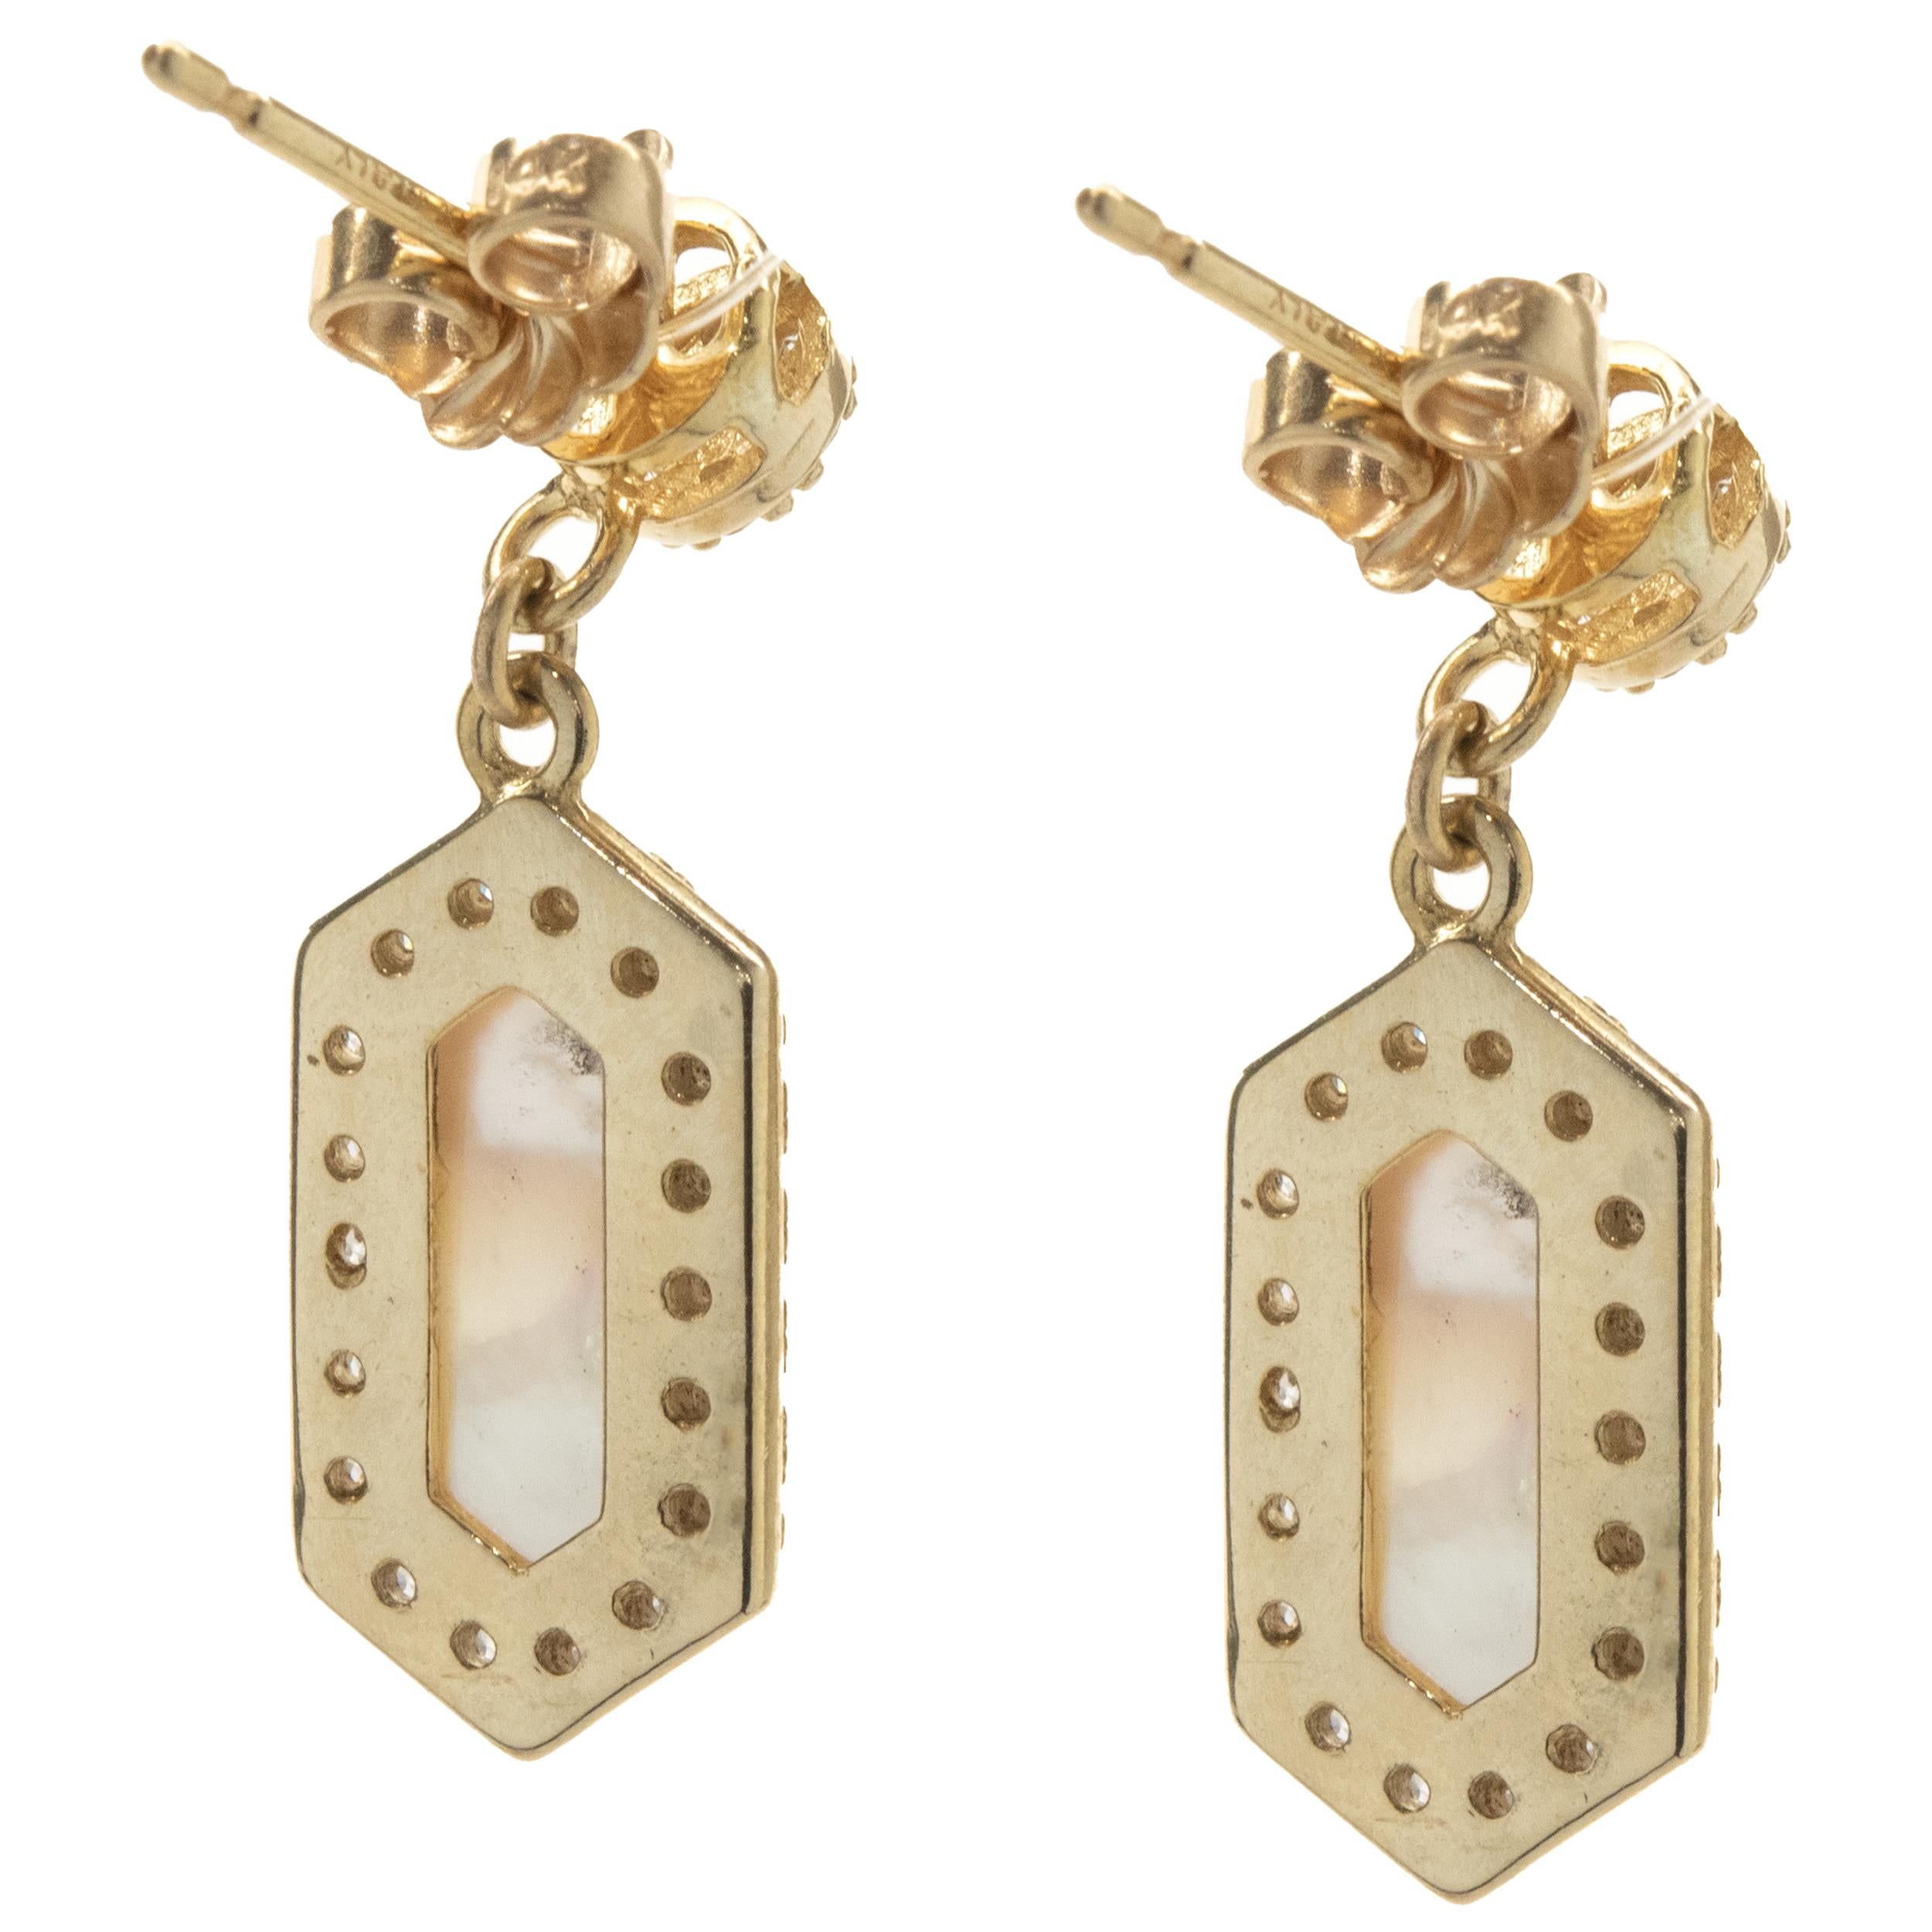 Designer: Italian
Material: 14K yellow gold
Diamond: 50 round brilliant cut = 0.50cttw
Color: G
Clarity: SI1
Dimensions: earrings measure 25mm in length
Fastenings: post with friction backs
Weight: 3.64 grams